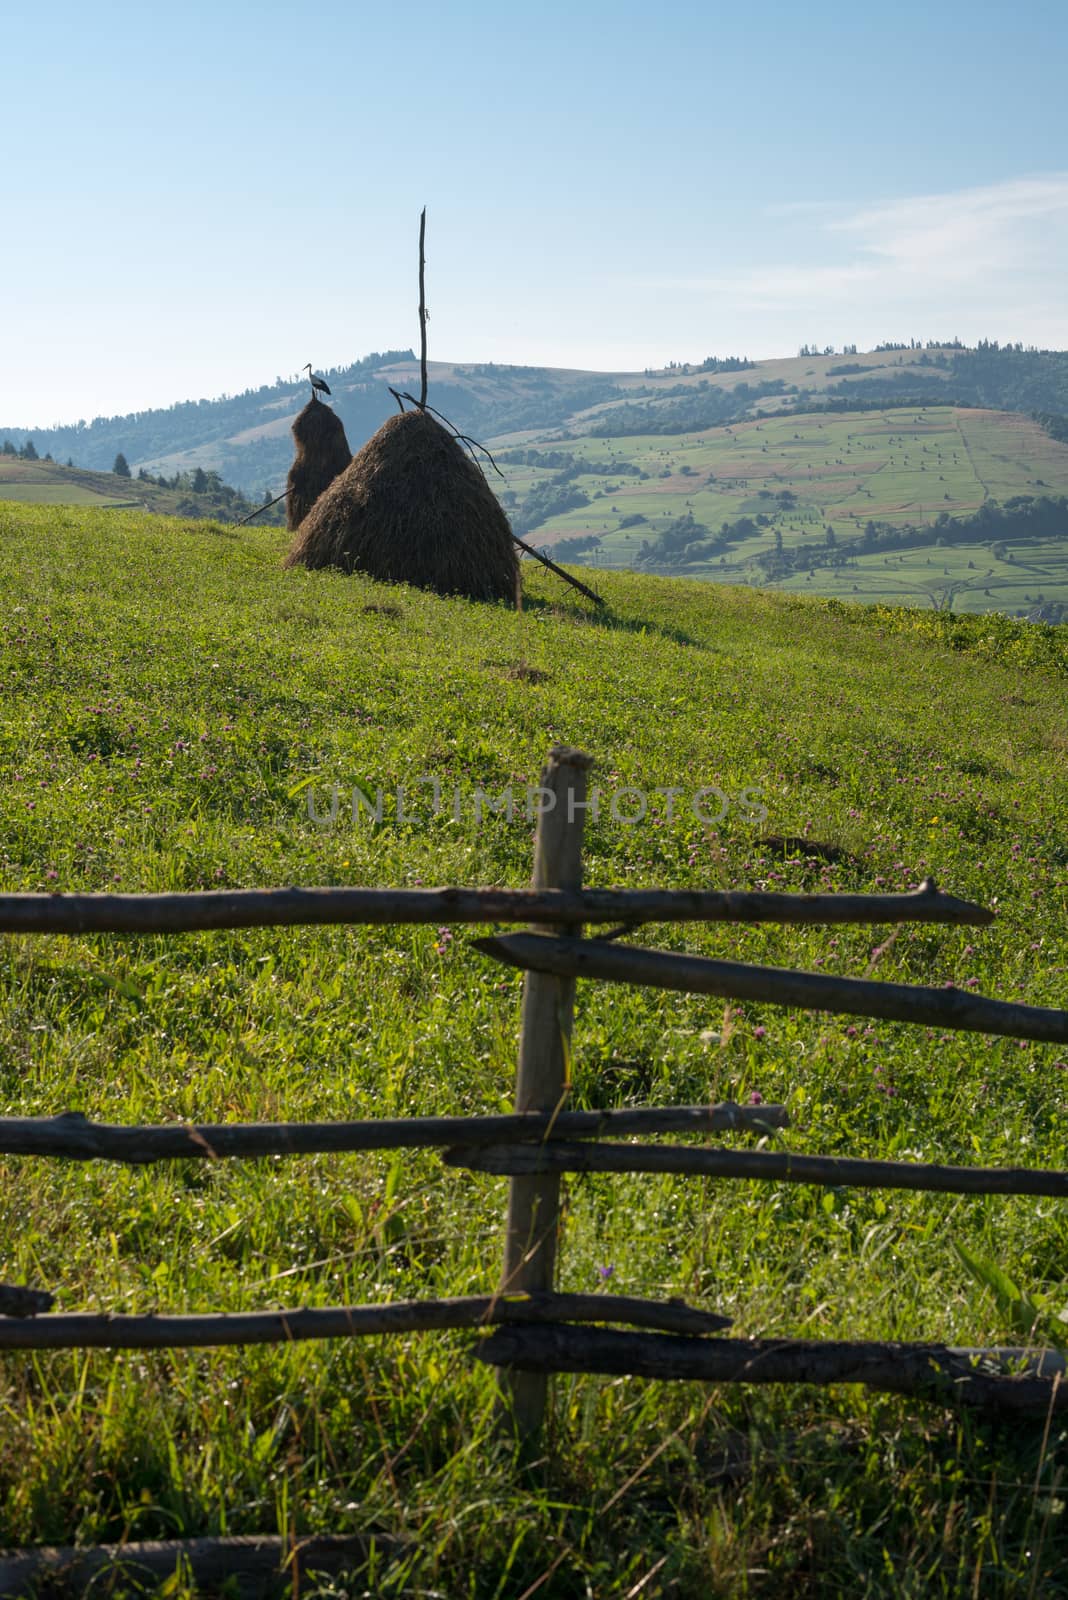 Wooden fence, haystacks and white stork in the Ukrainian Carpathian Mountains.